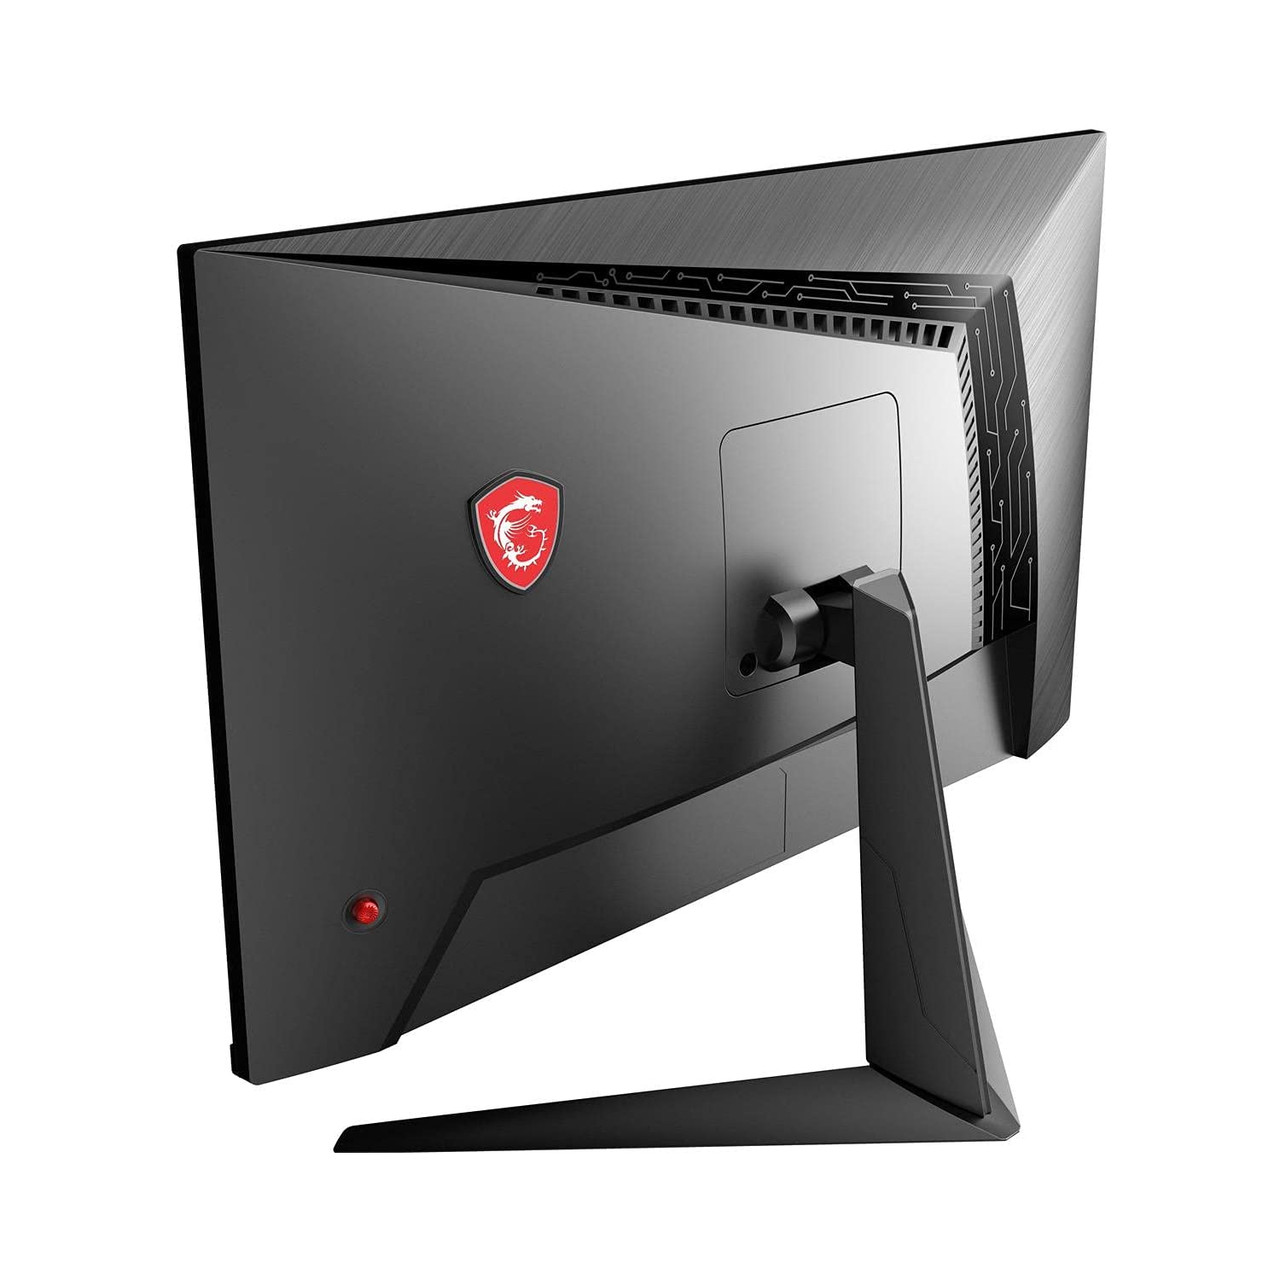 MSI OPTIX MAG273 27" 16:9 Full HD 144Hz HDR Ready IPS Gaming Monitor with FreeSync